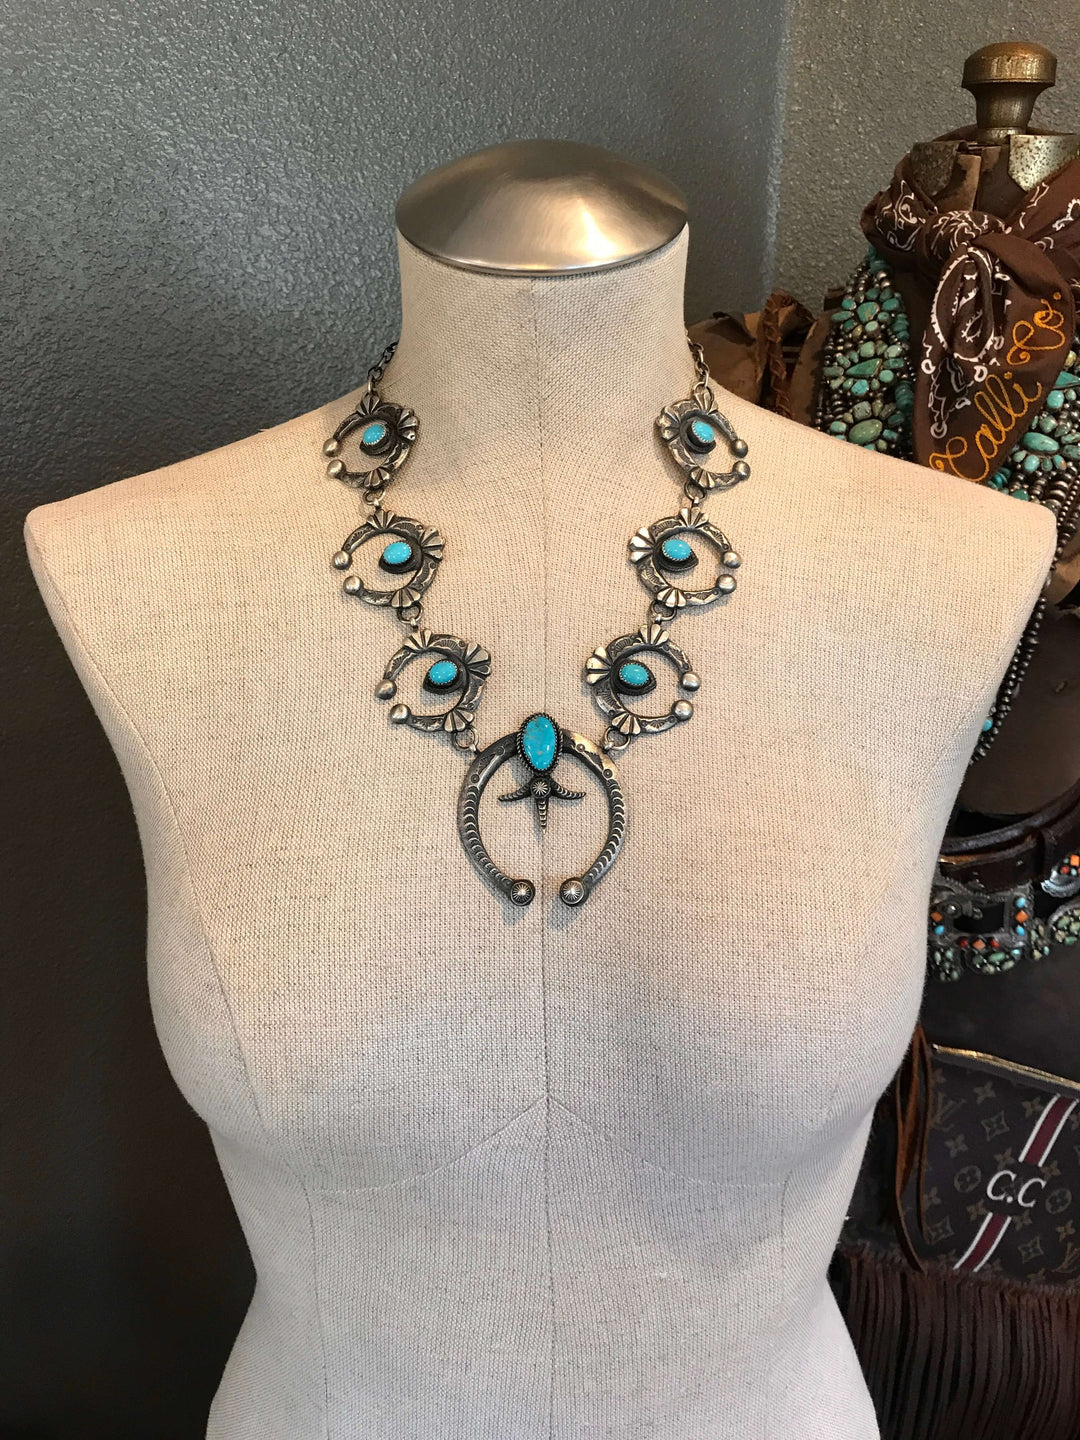 The Khotan Turquoise Squash Blossom Necklace Set-Necklaces-Calli Co., Turquoise and Silver Jewelry, Native American Handmade, Zuni Tribe, Navajo Tribe, Brock Texas